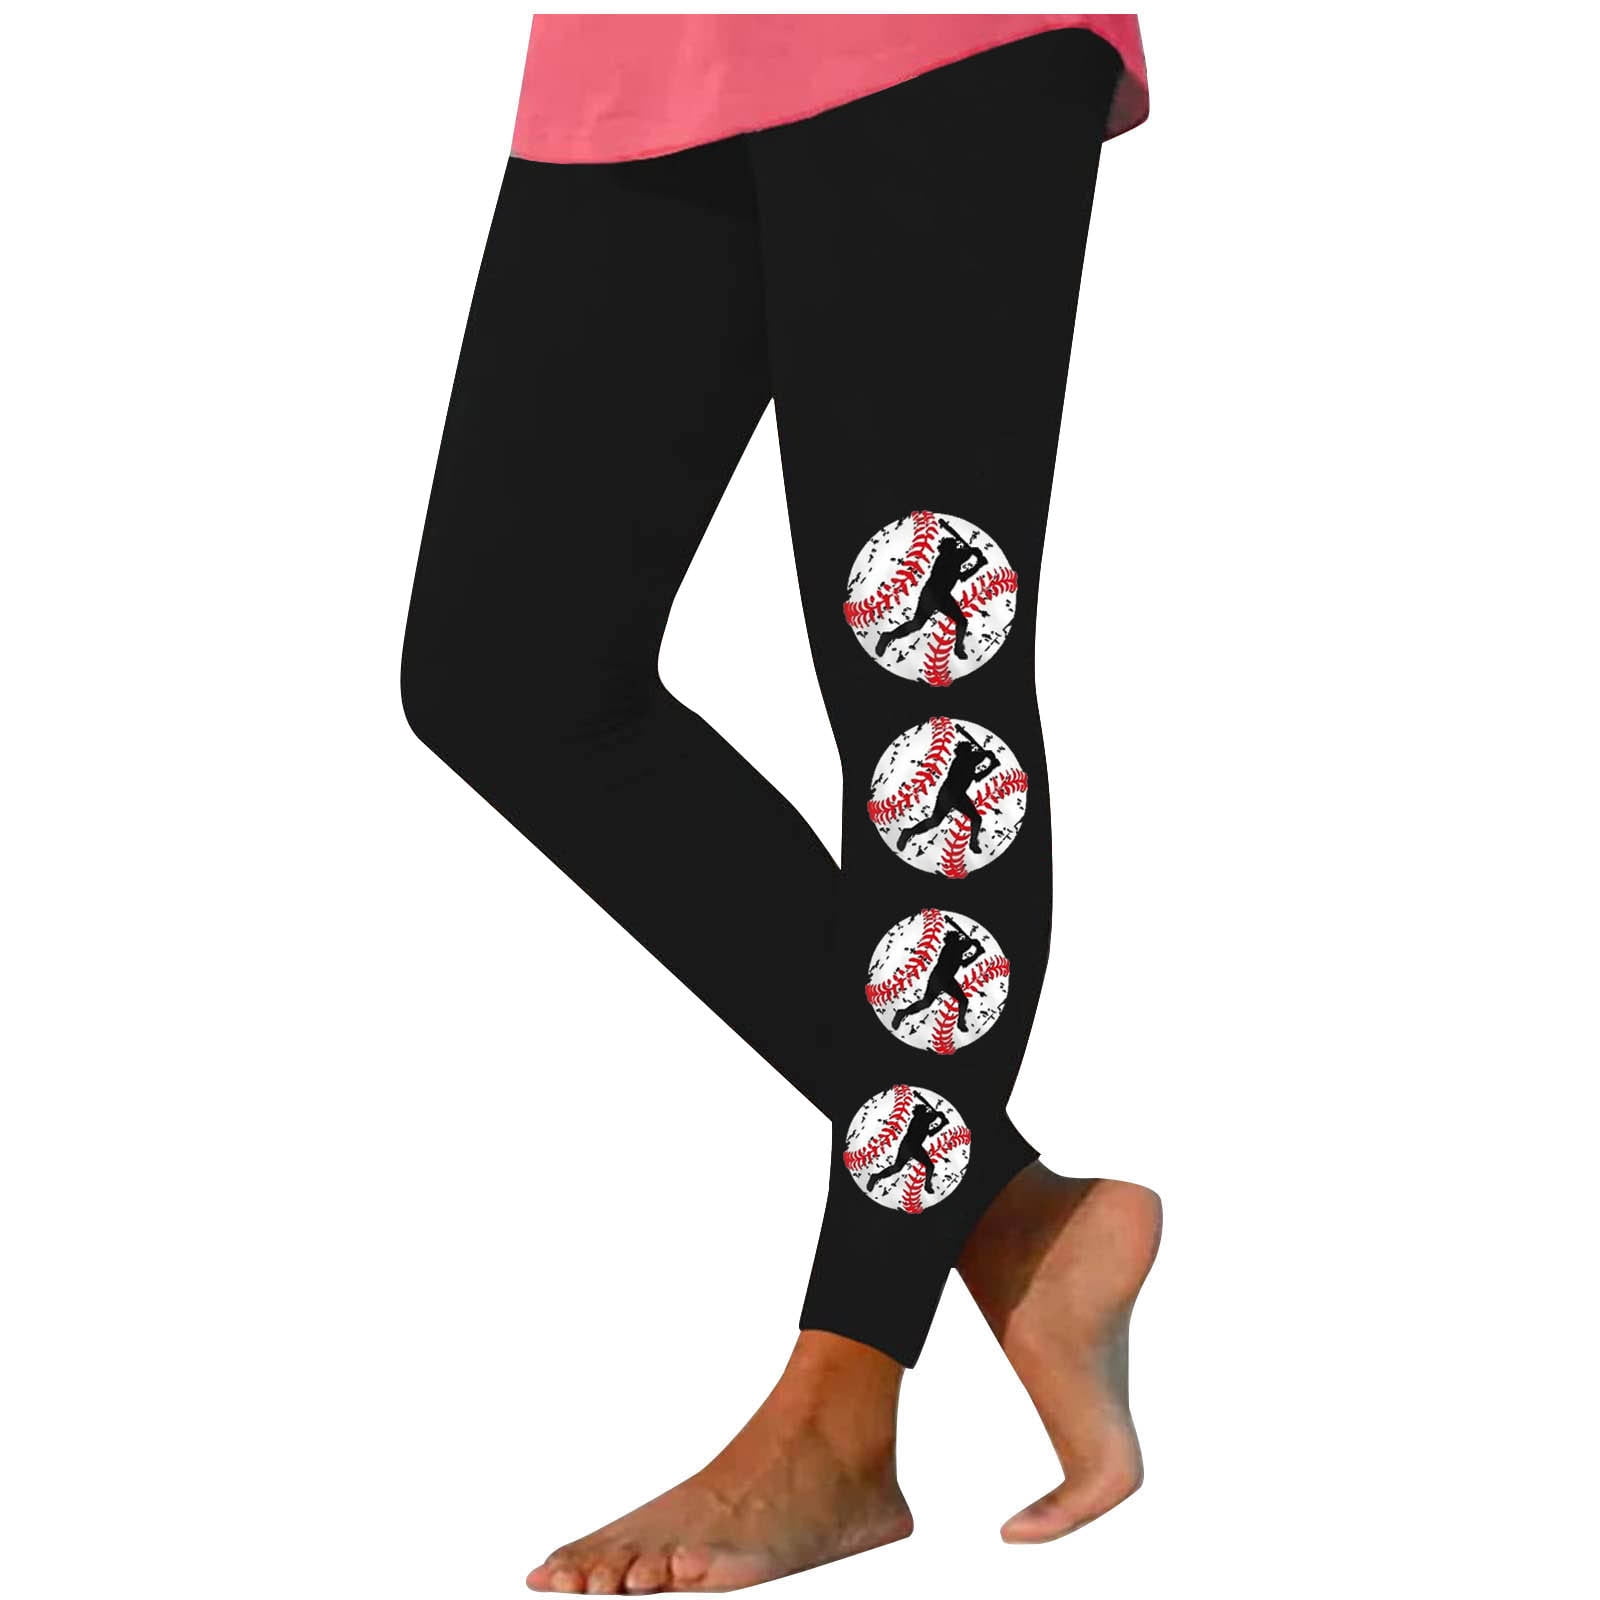 Slim fit: leggings with a logo waistband - black | Comma